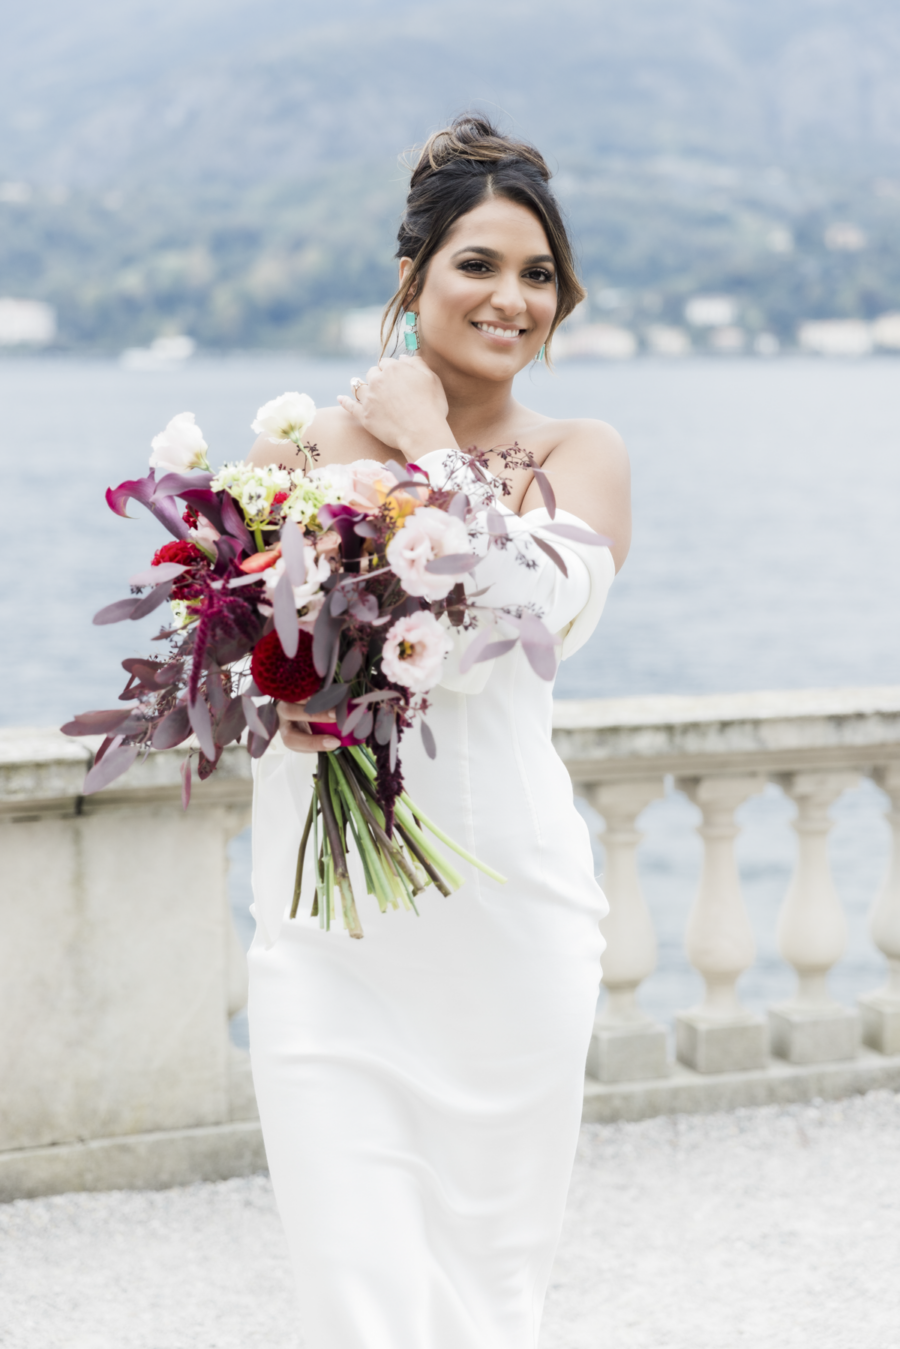 Lake Como Elopement - a Real-life luxurious intimate wedding